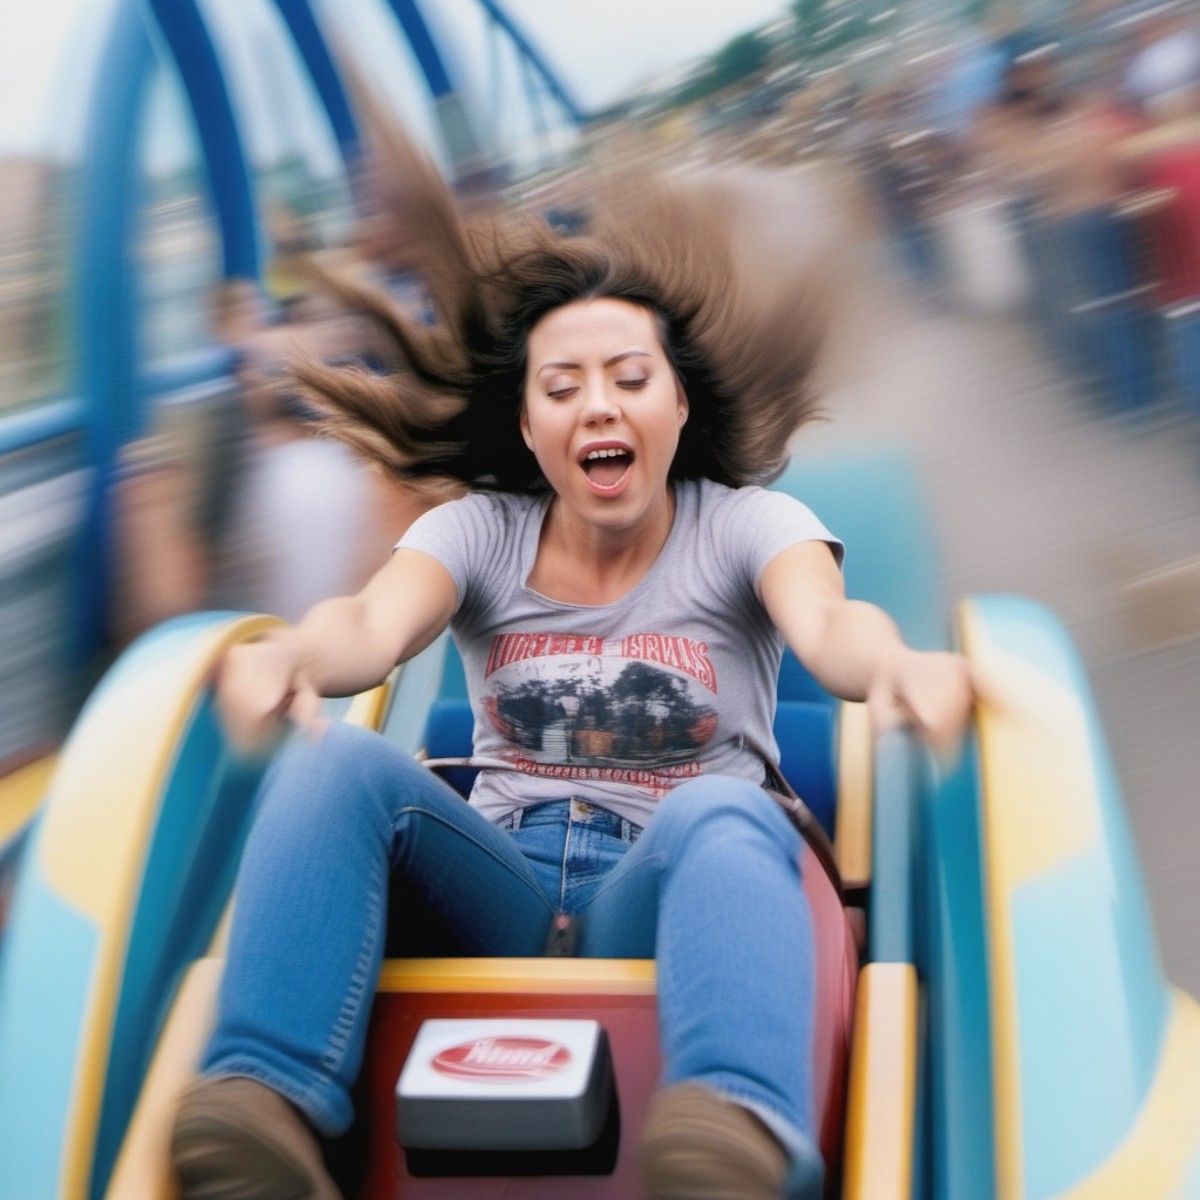 aubreyplaza A excited woman on a roller-coaster, hair flying through the air and she floats at moment of weightlessness. W...